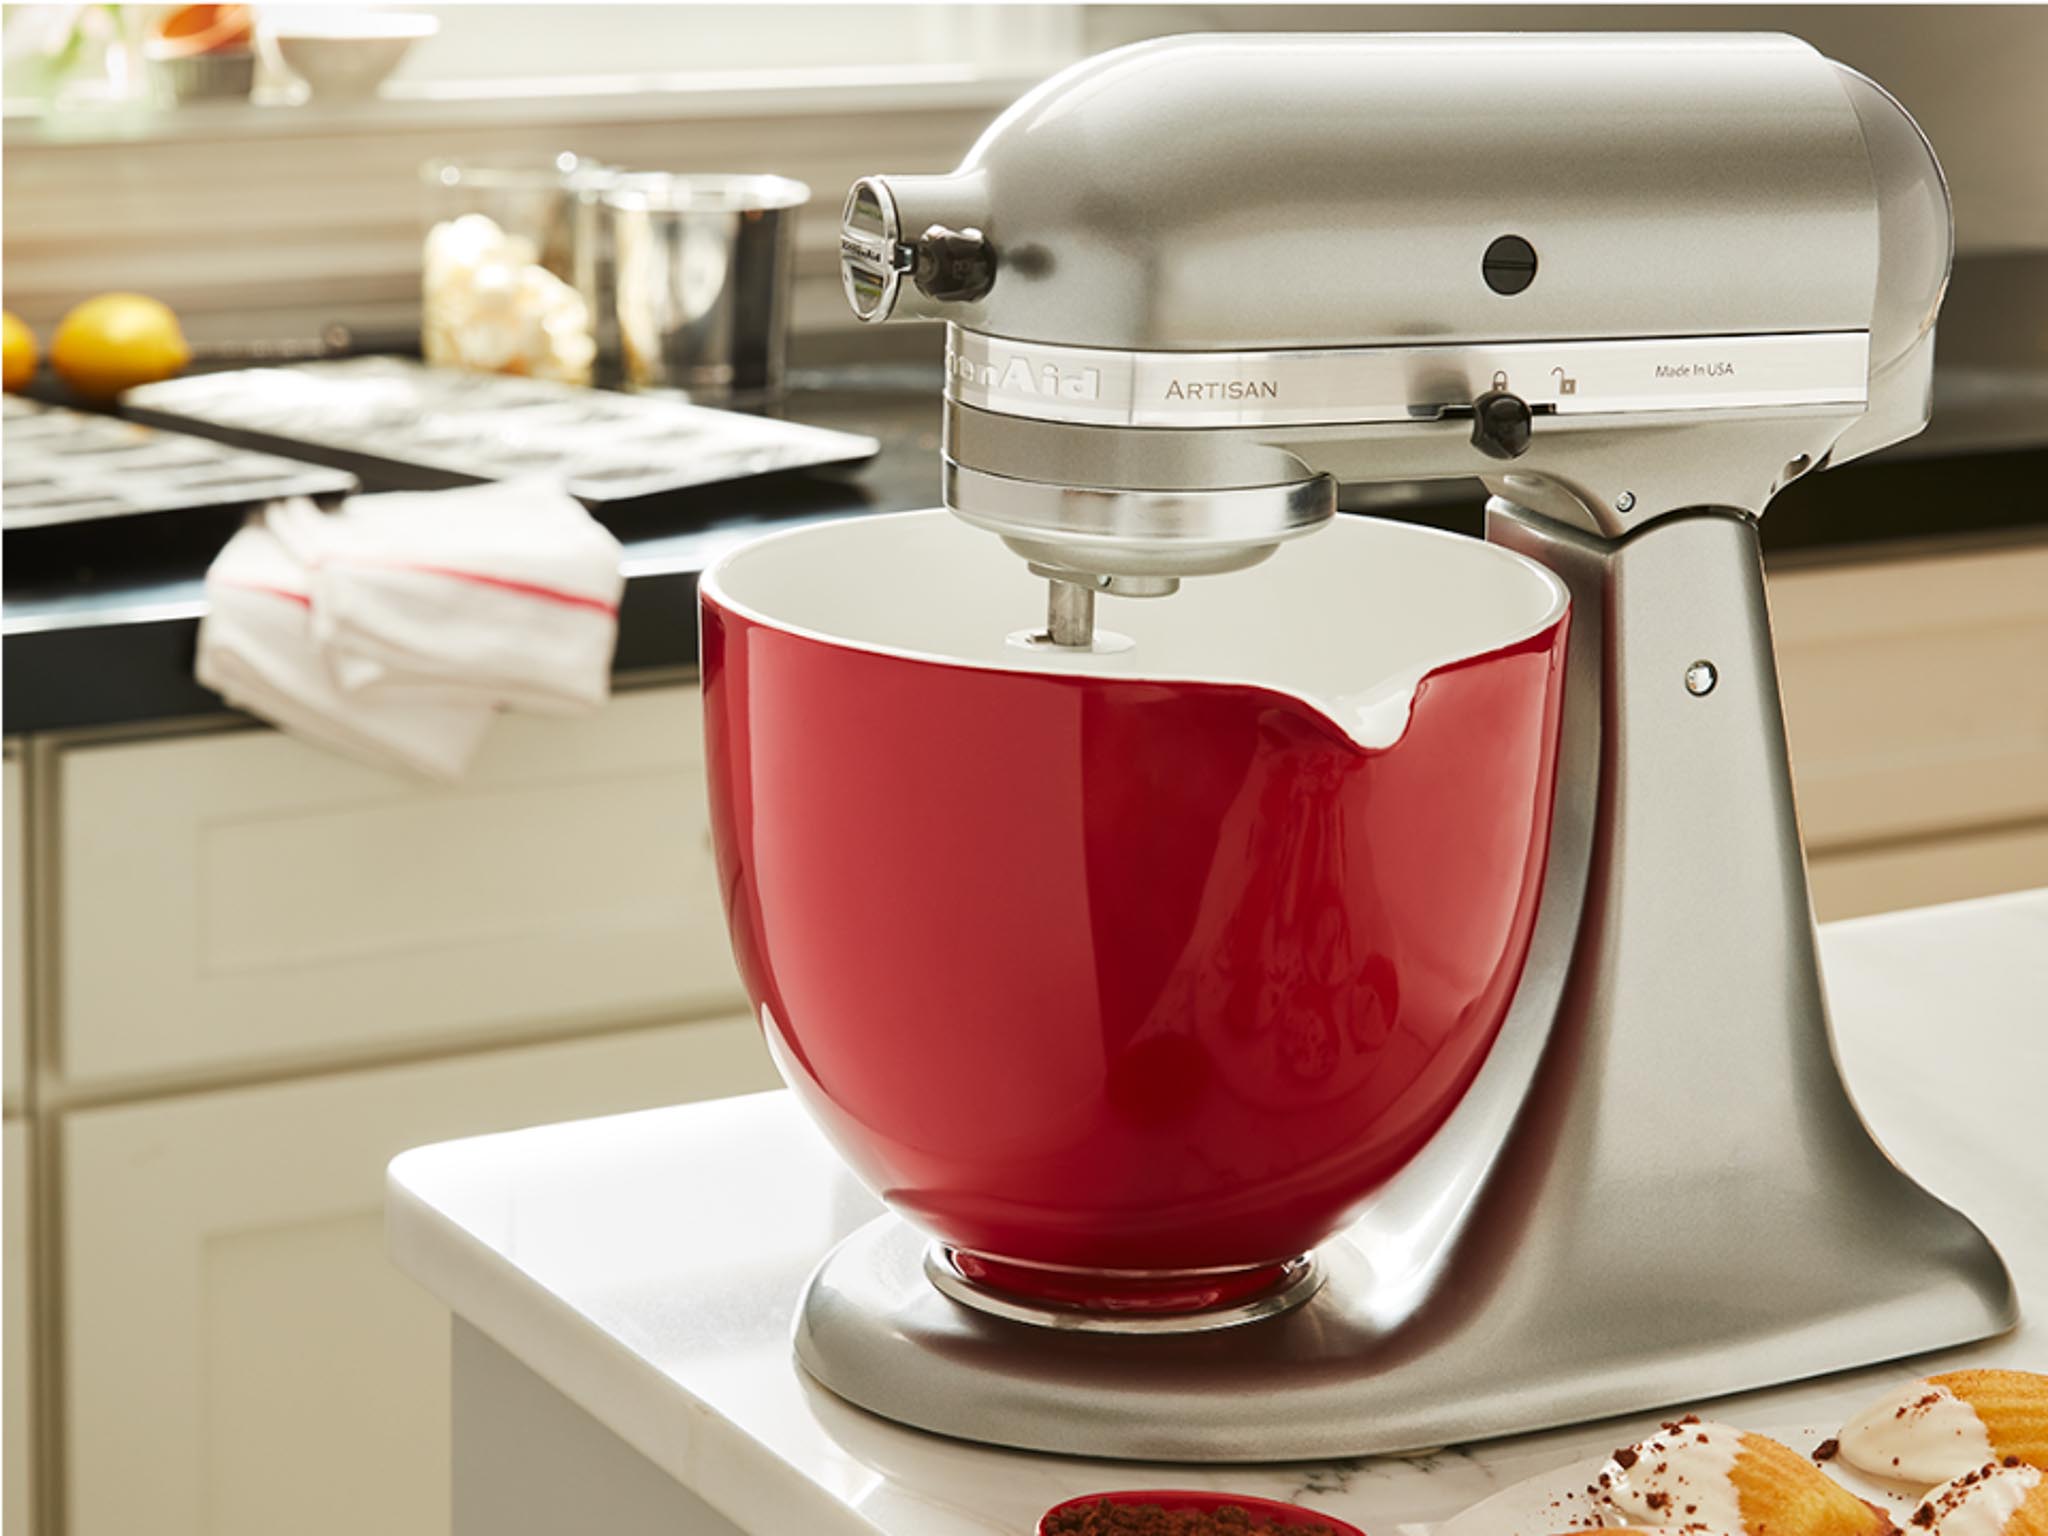 Accessories ceramic bowl red empire mixer and bowl on kitchen counter